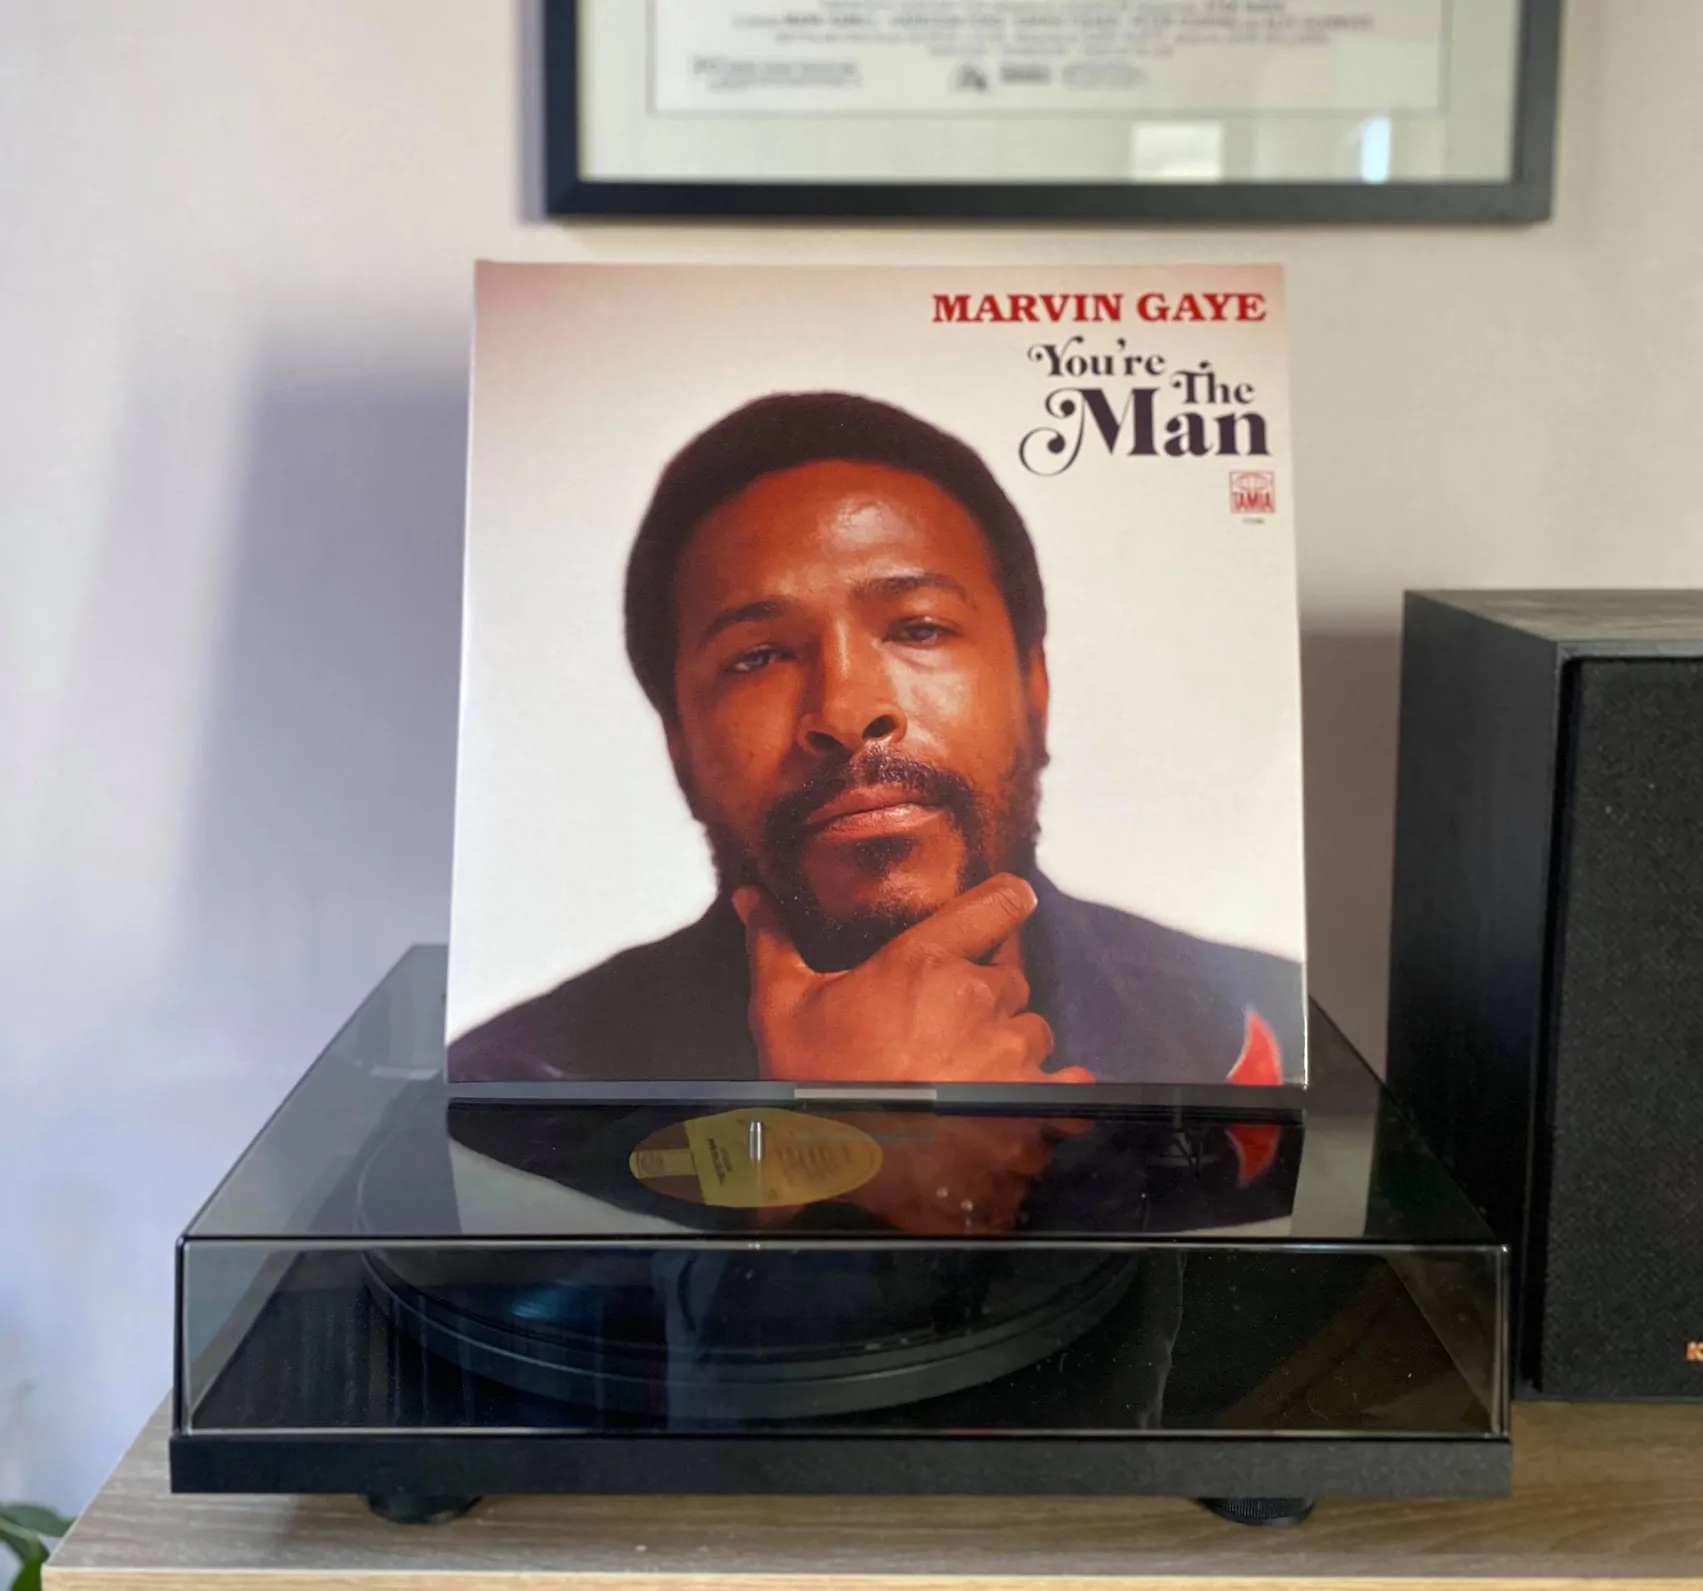 ON THE TURNTABLE: Marvin Gaye – You’re The Man